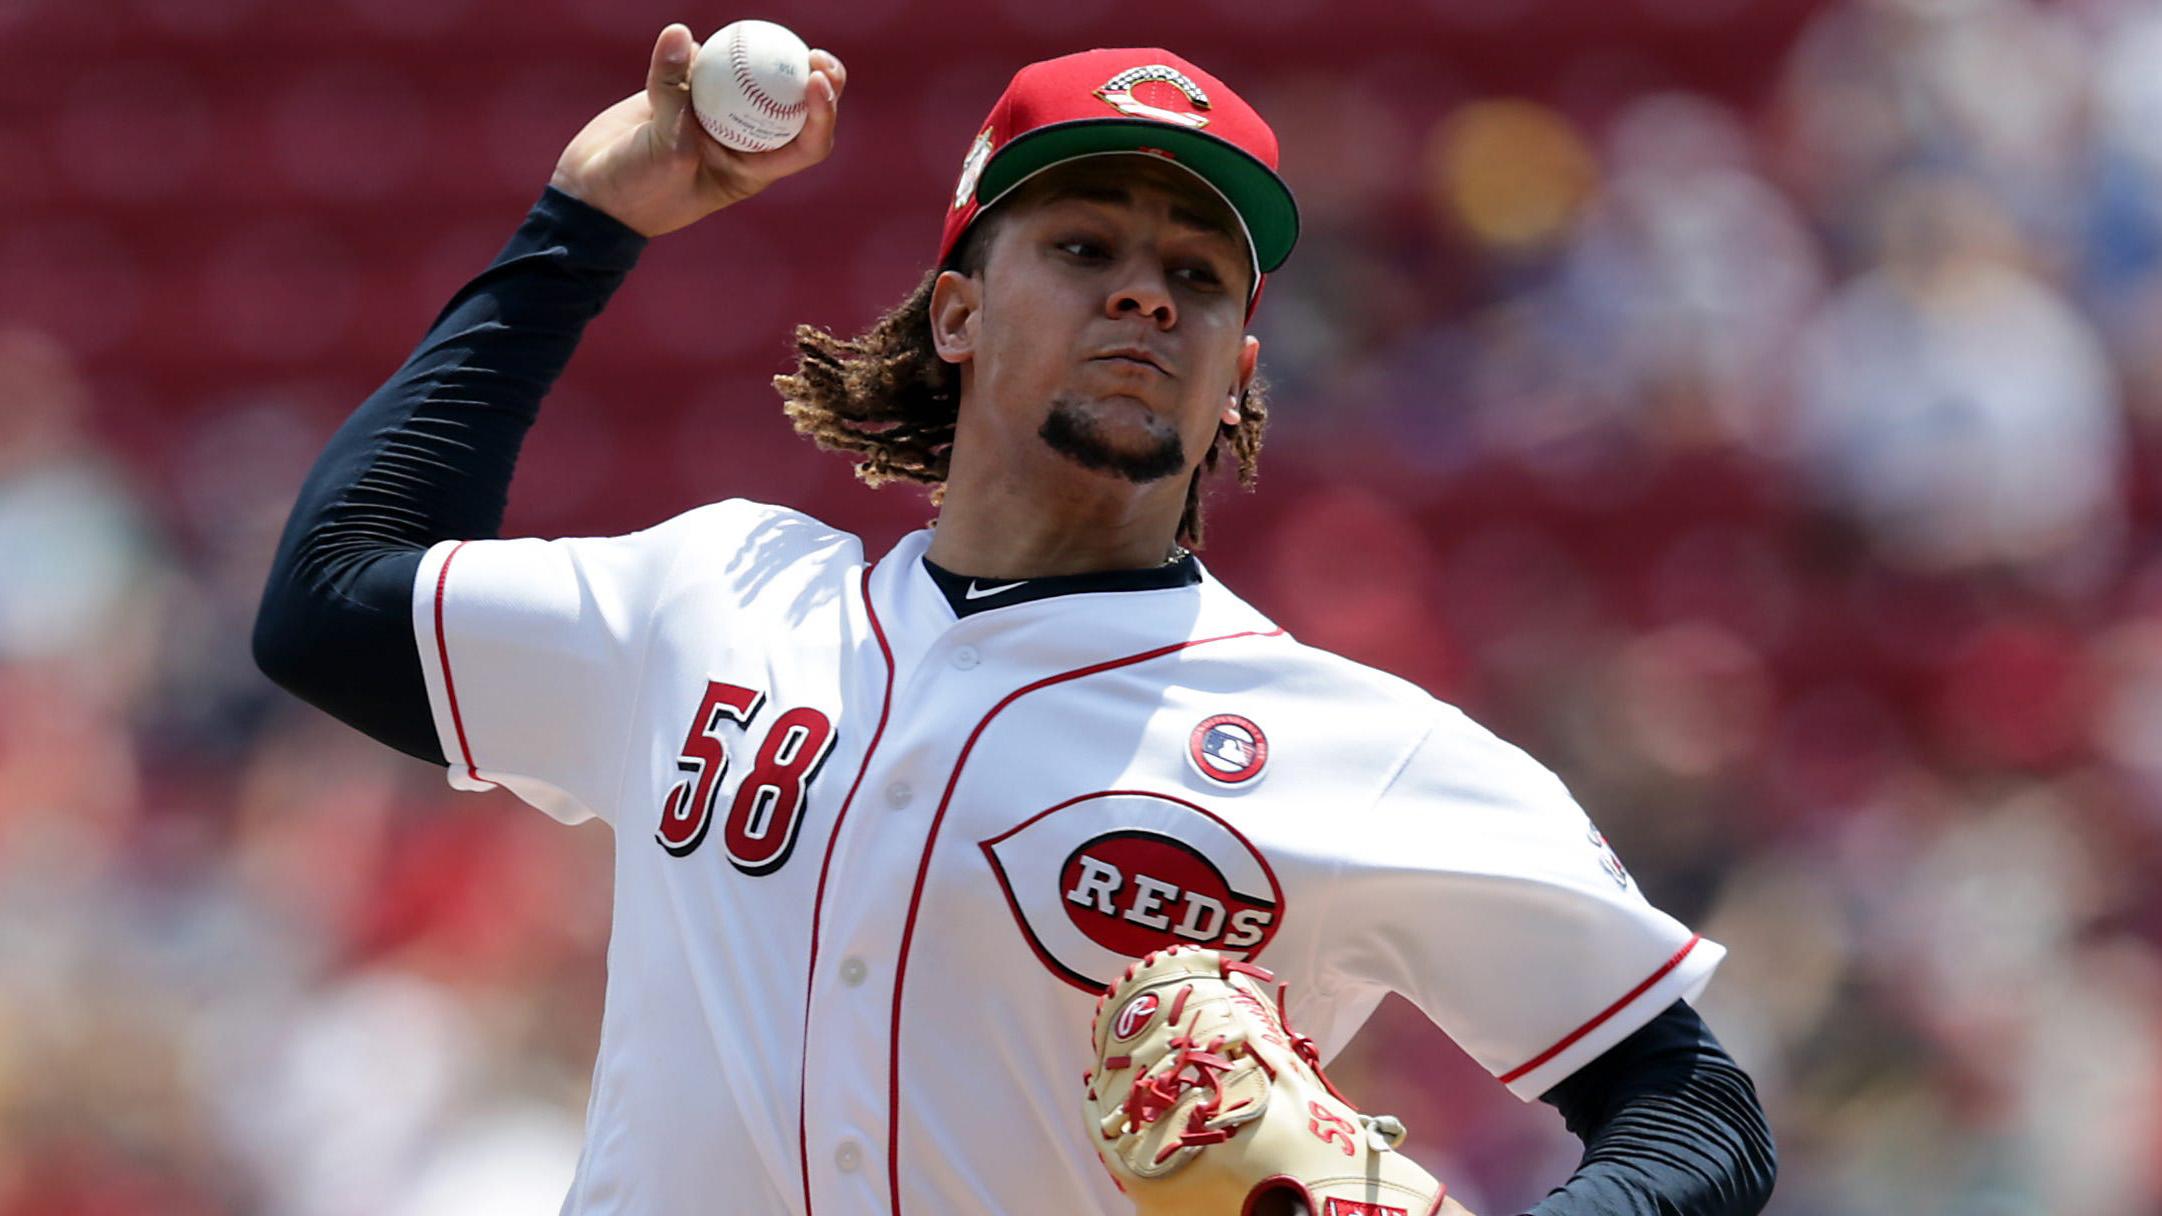 Luis Castillo fires pitch to plate in white Reds jersey / Kareem Elgazzar/USA TODAY